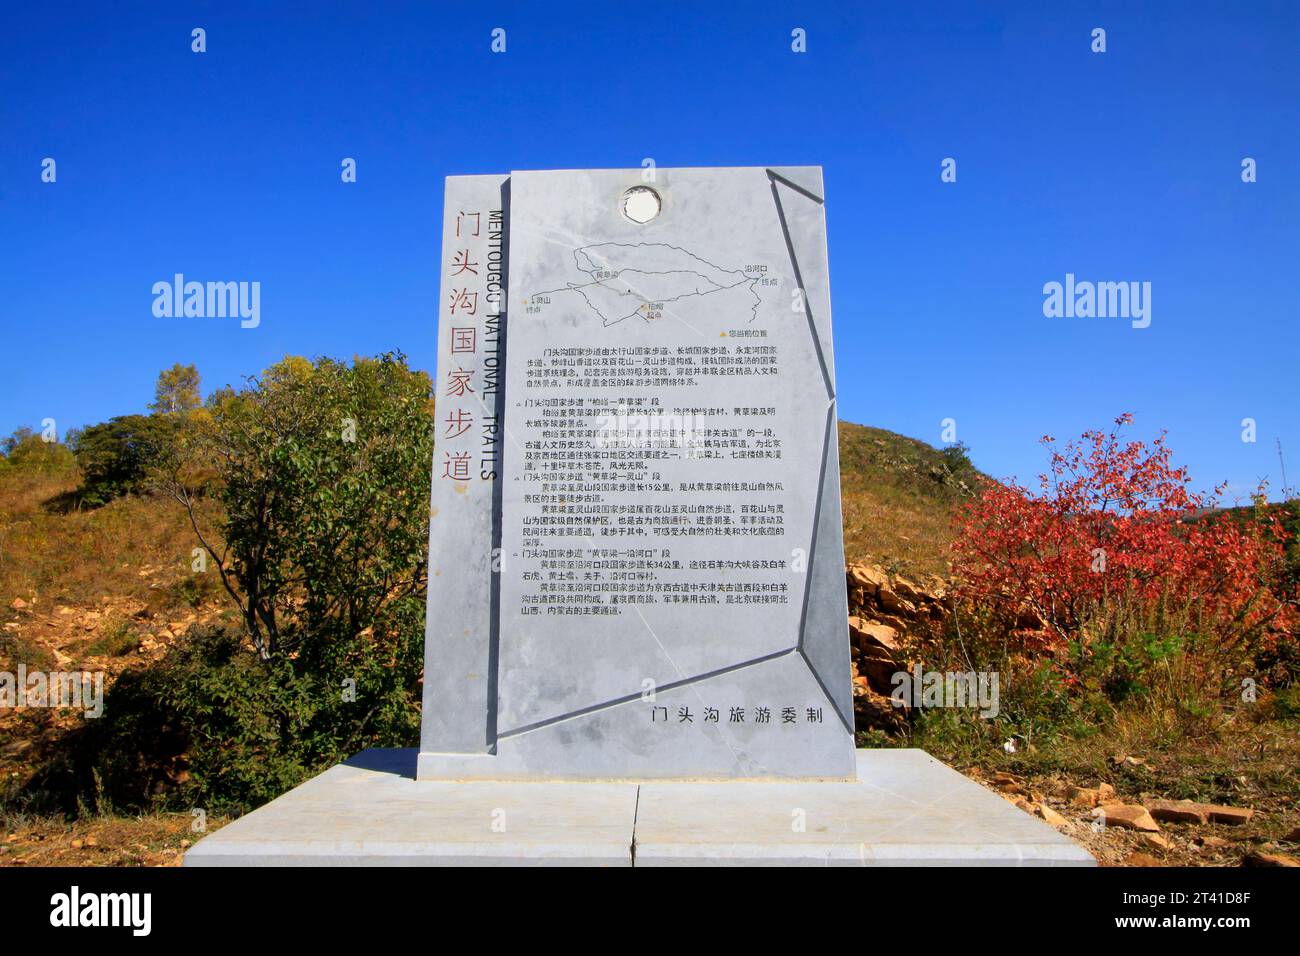 BEIJING - OCTOBER 5: Chinese style stone tablets in the wild, on october 5, 2014, Beijing, China Stock Photo